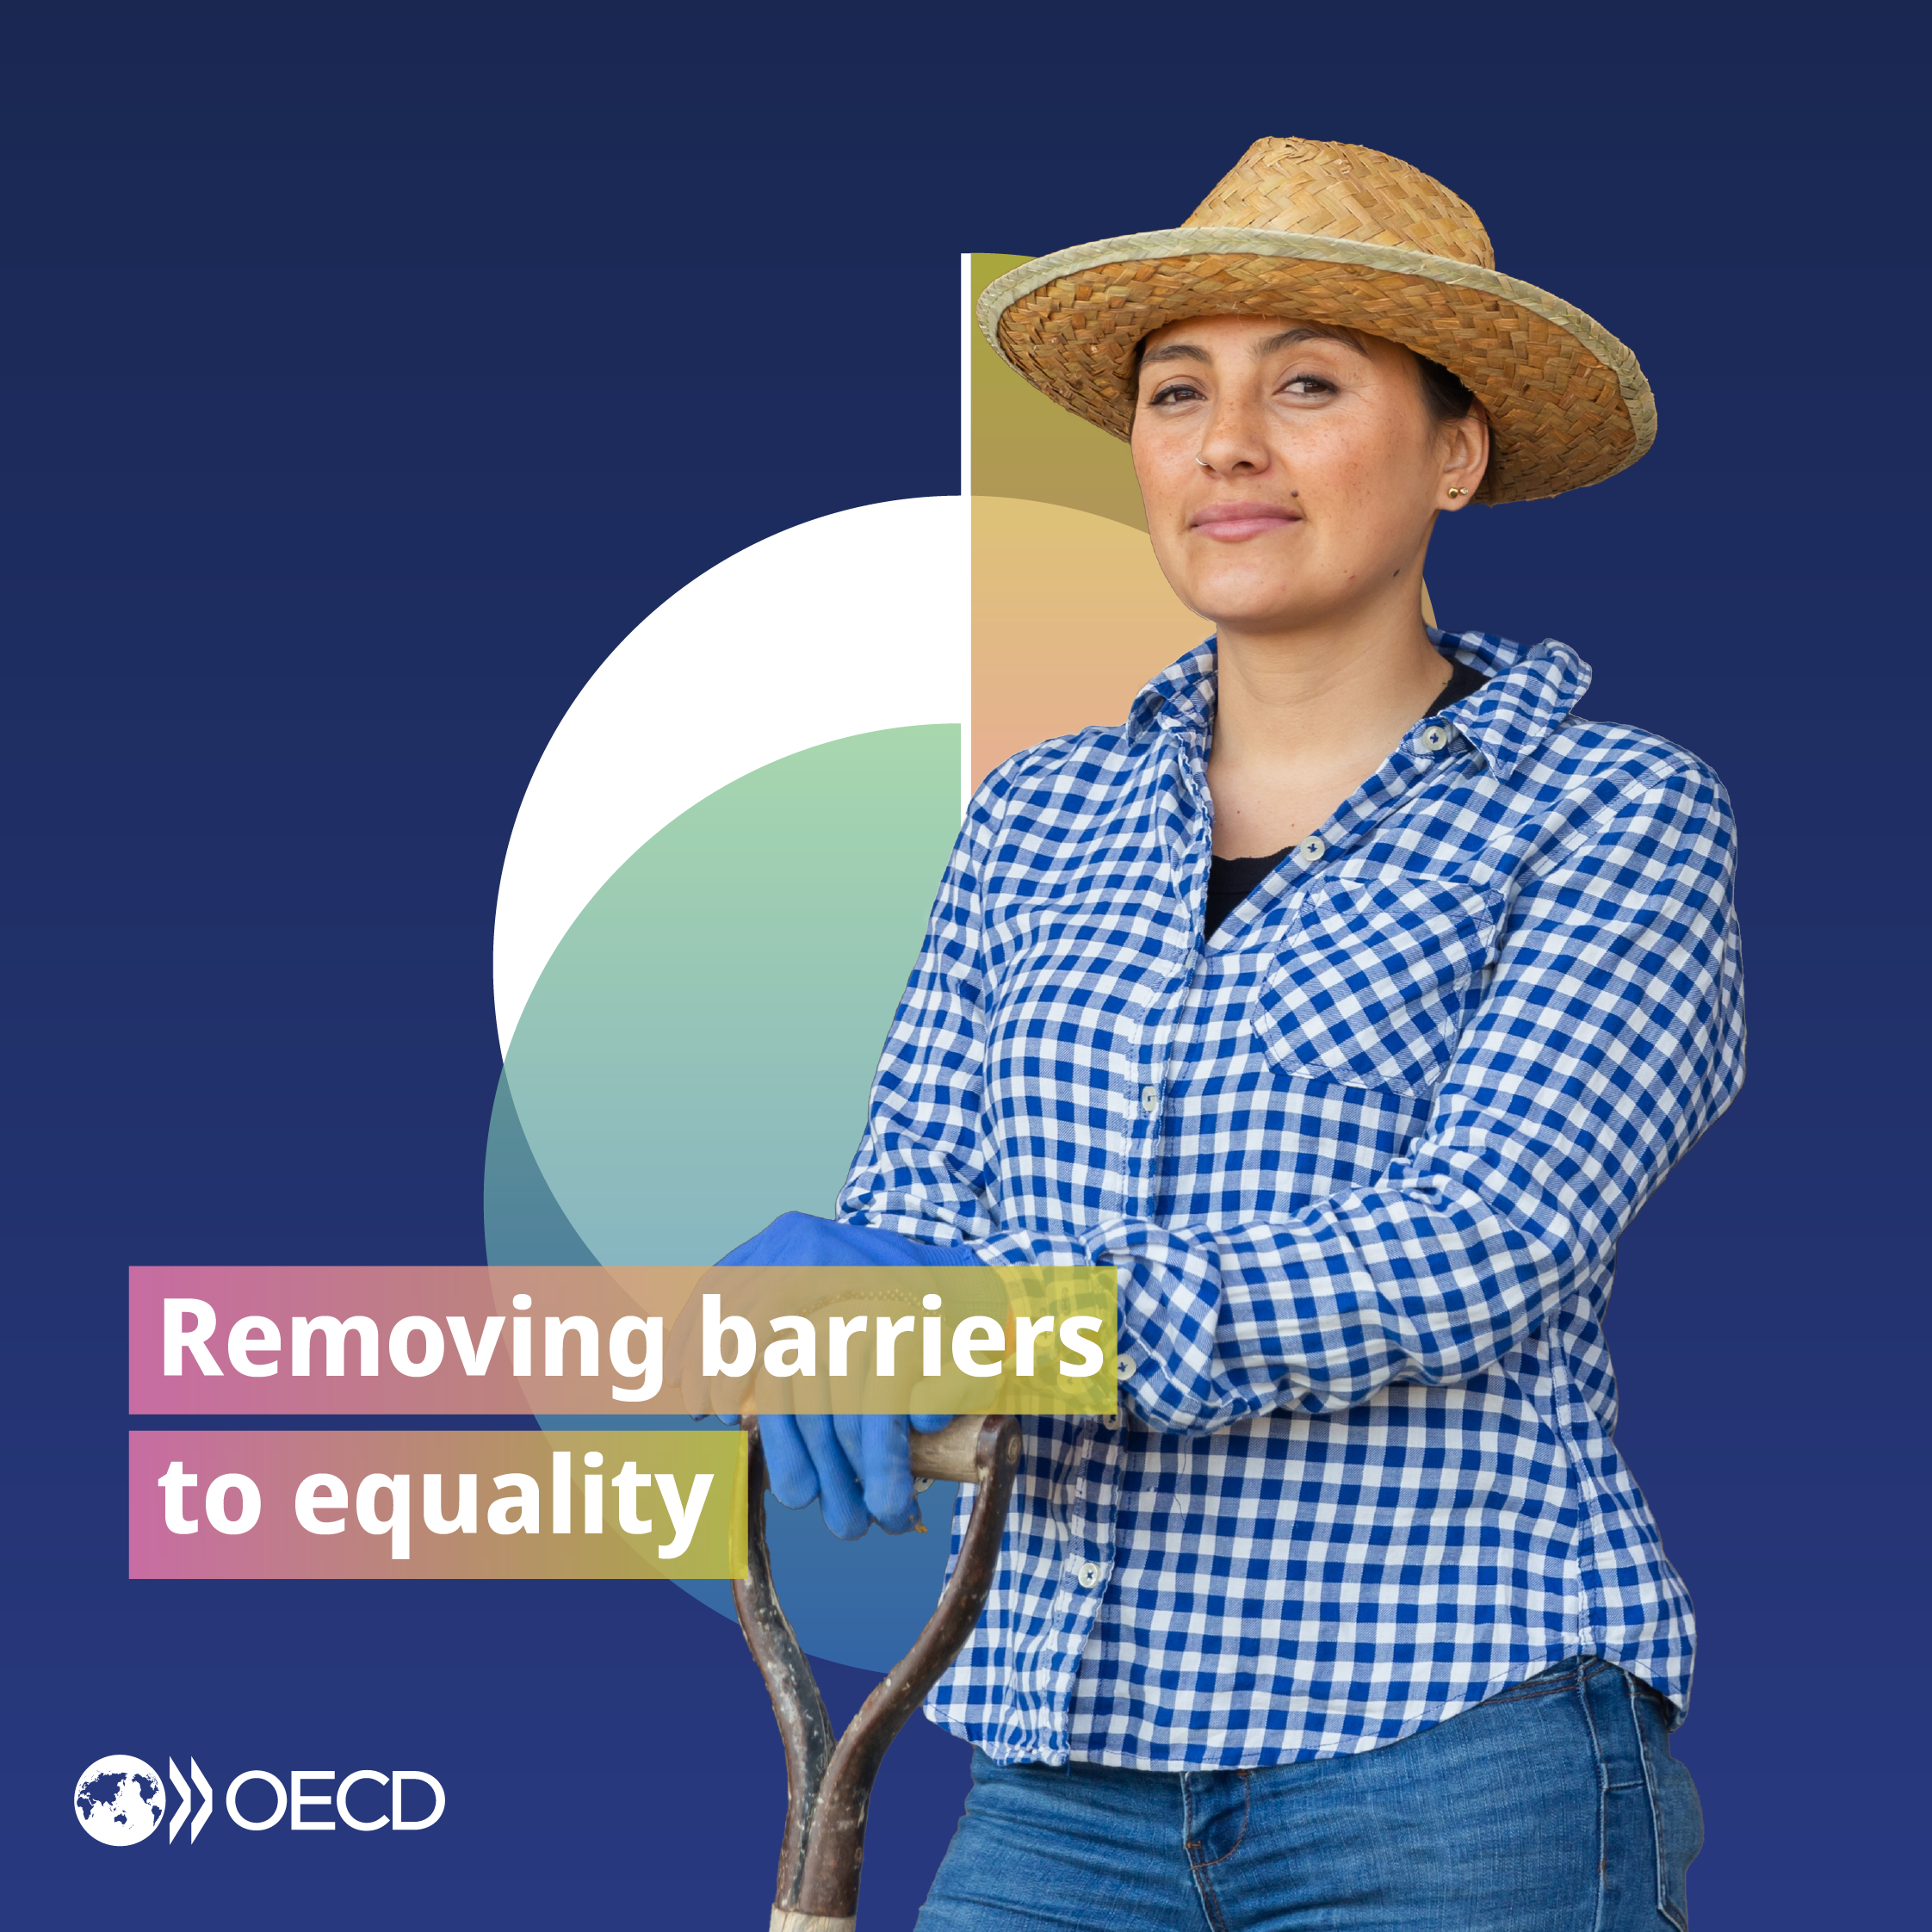 Image on removing barriers to equality